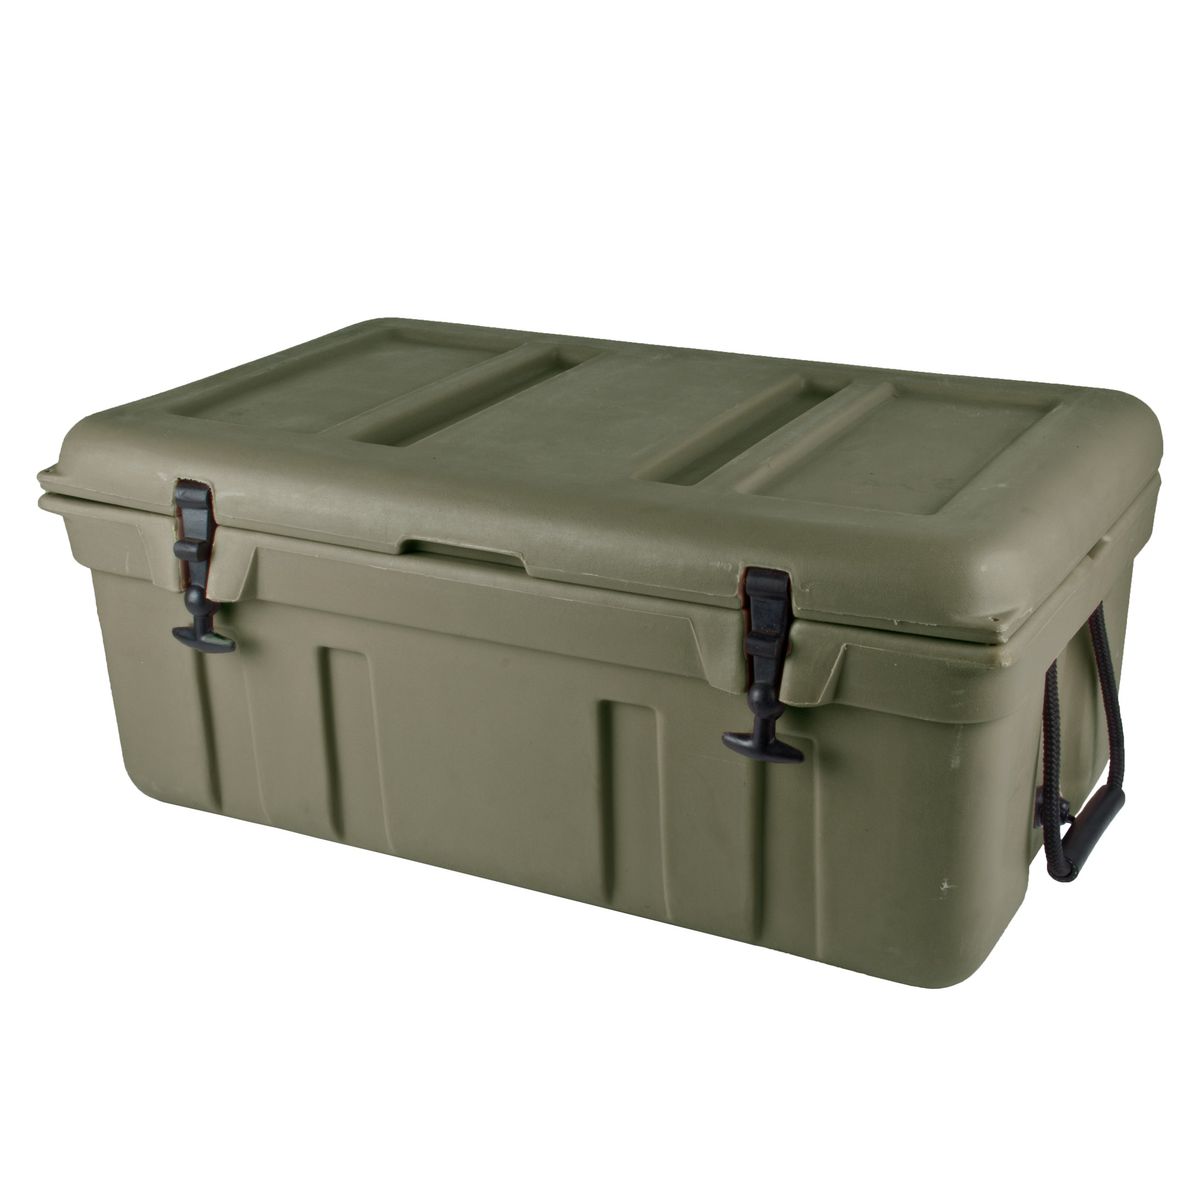 Romer Coolerbox 40 Litre - Olive Green Buy Online in Zimbabwe thedailysale.shop